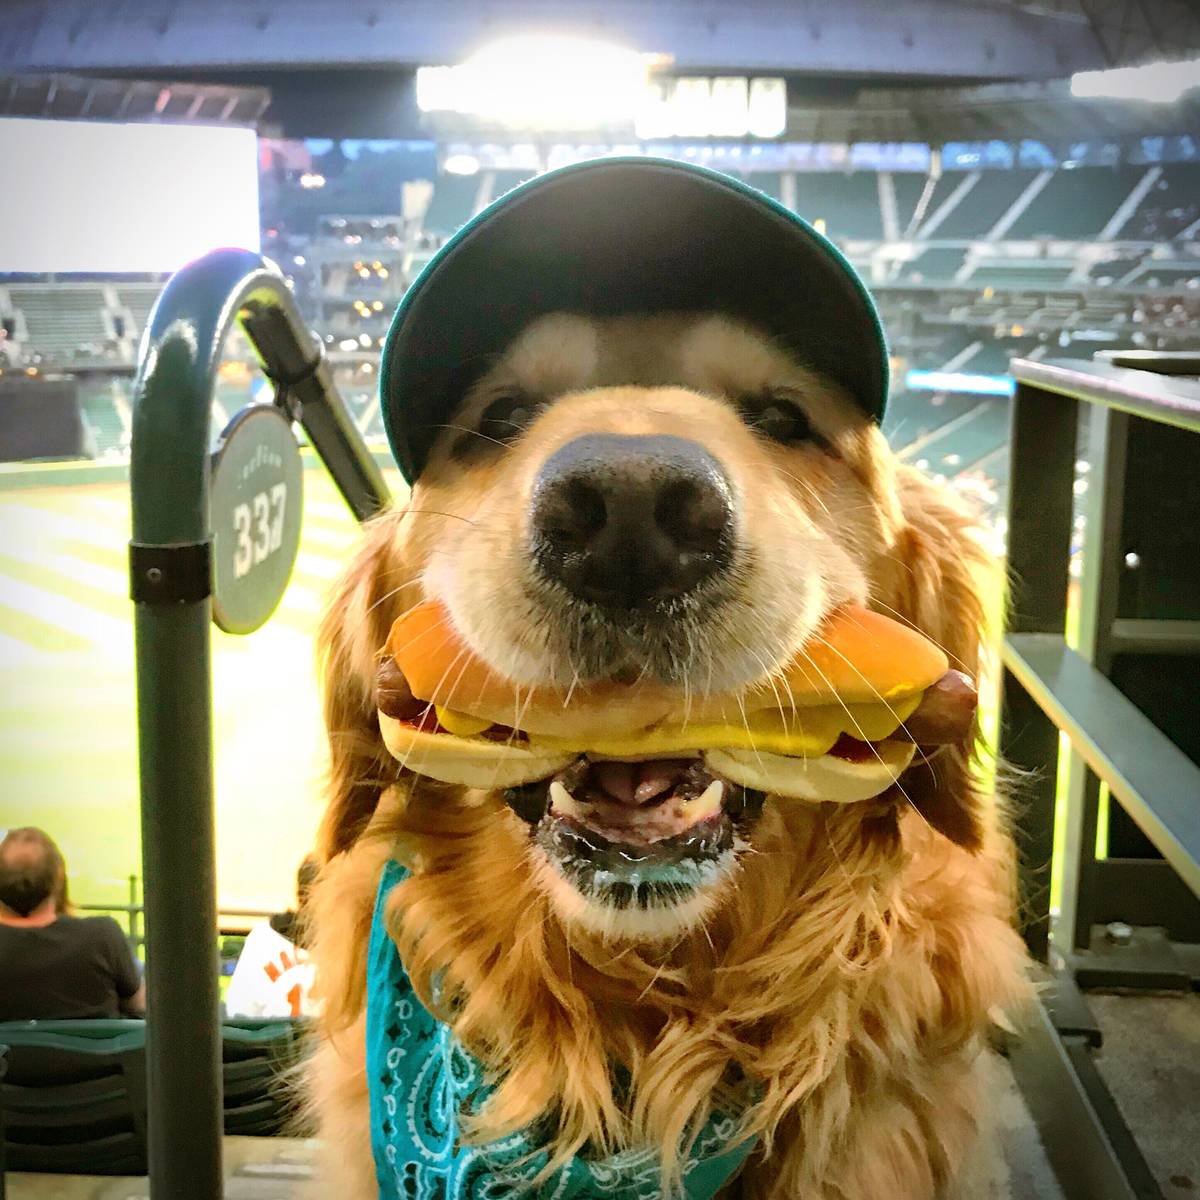 Ande Edlund’s golden retriever Dash is one hot dog at a Seattle Mariners game on Sept. 5, 2018. Photo courtesy of Ande Edlund